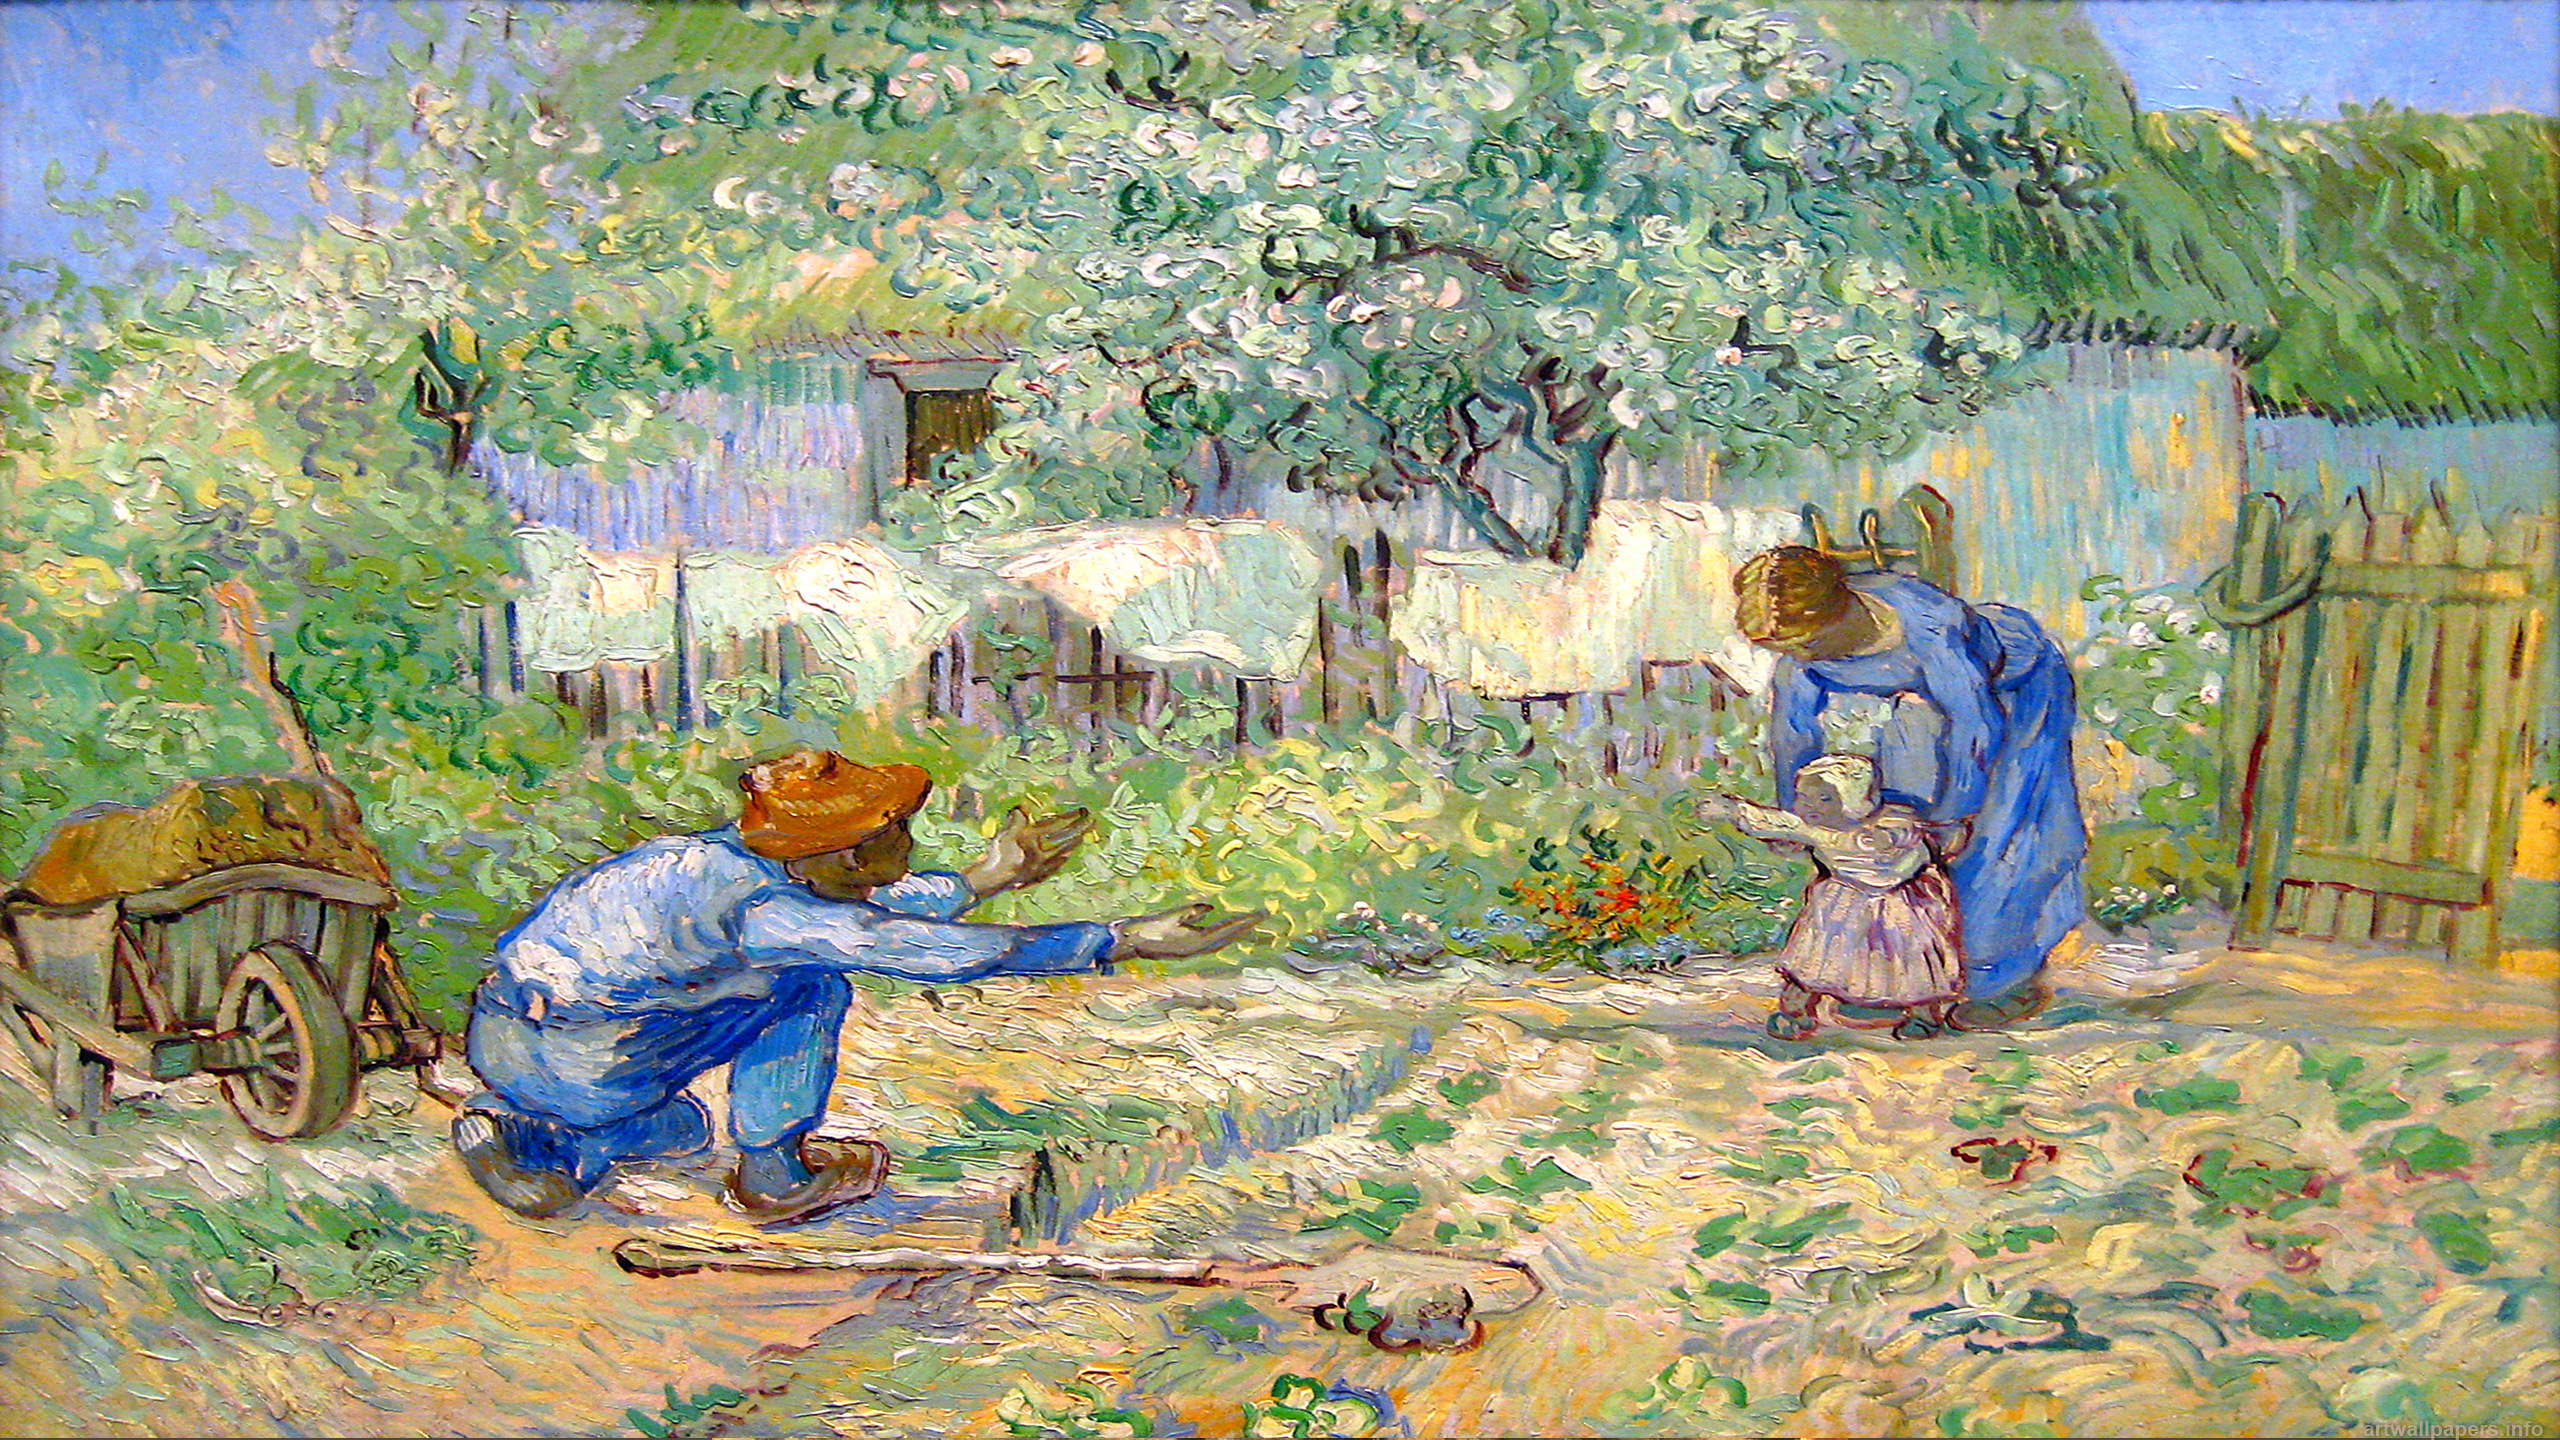 Van Gogh Family Wallpaper And Image Pictures Photos